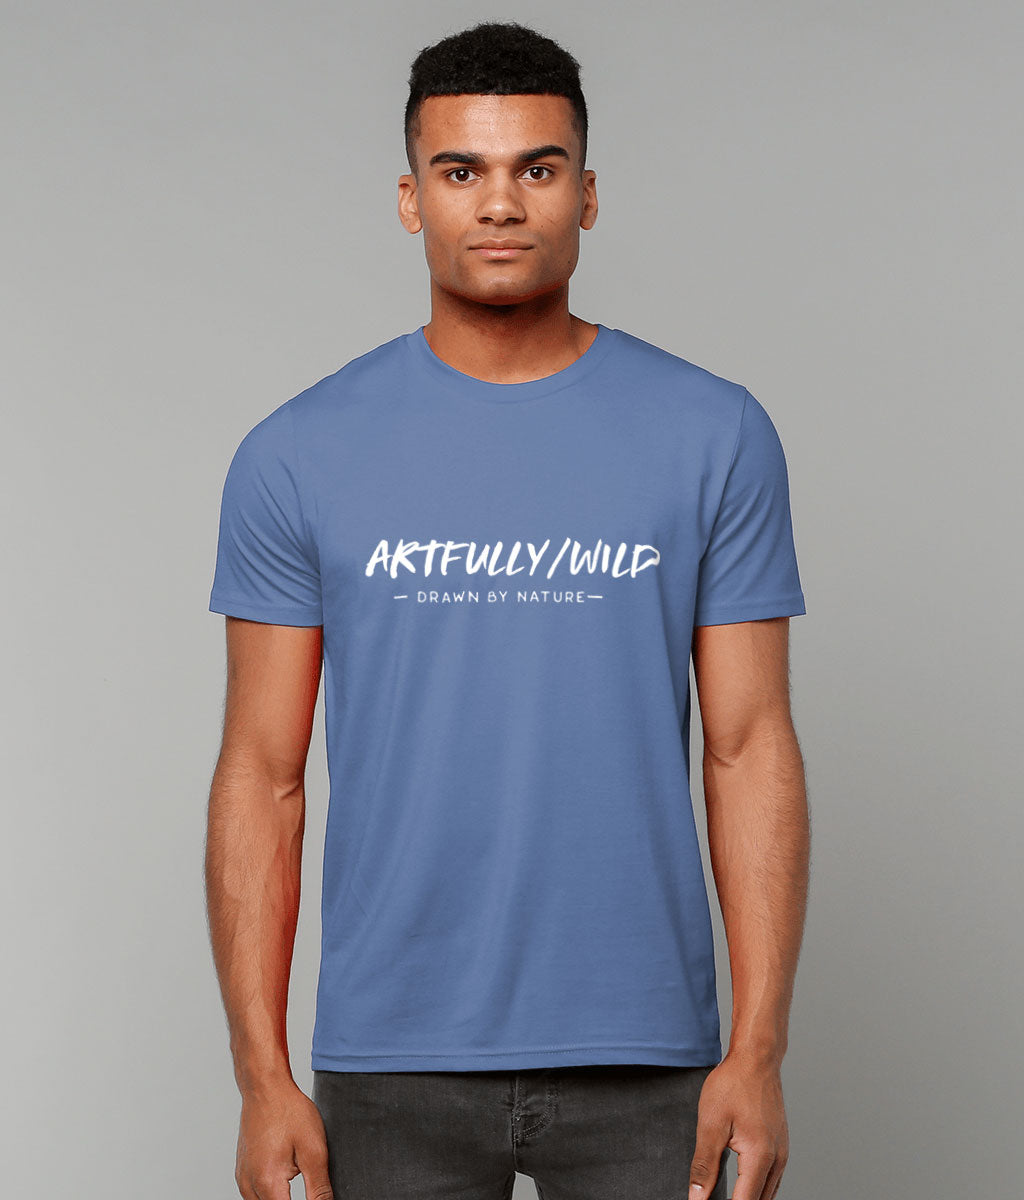 Male model wearing 'ARTFULLY WILD. DRAWN BY NATURE' Printed Organic Cotton Bright Blue T-Shirt. Unisex/Men/Women. Printed with eco-friendly water-based Inks. Ethical Clothing by Artfully/Wild.